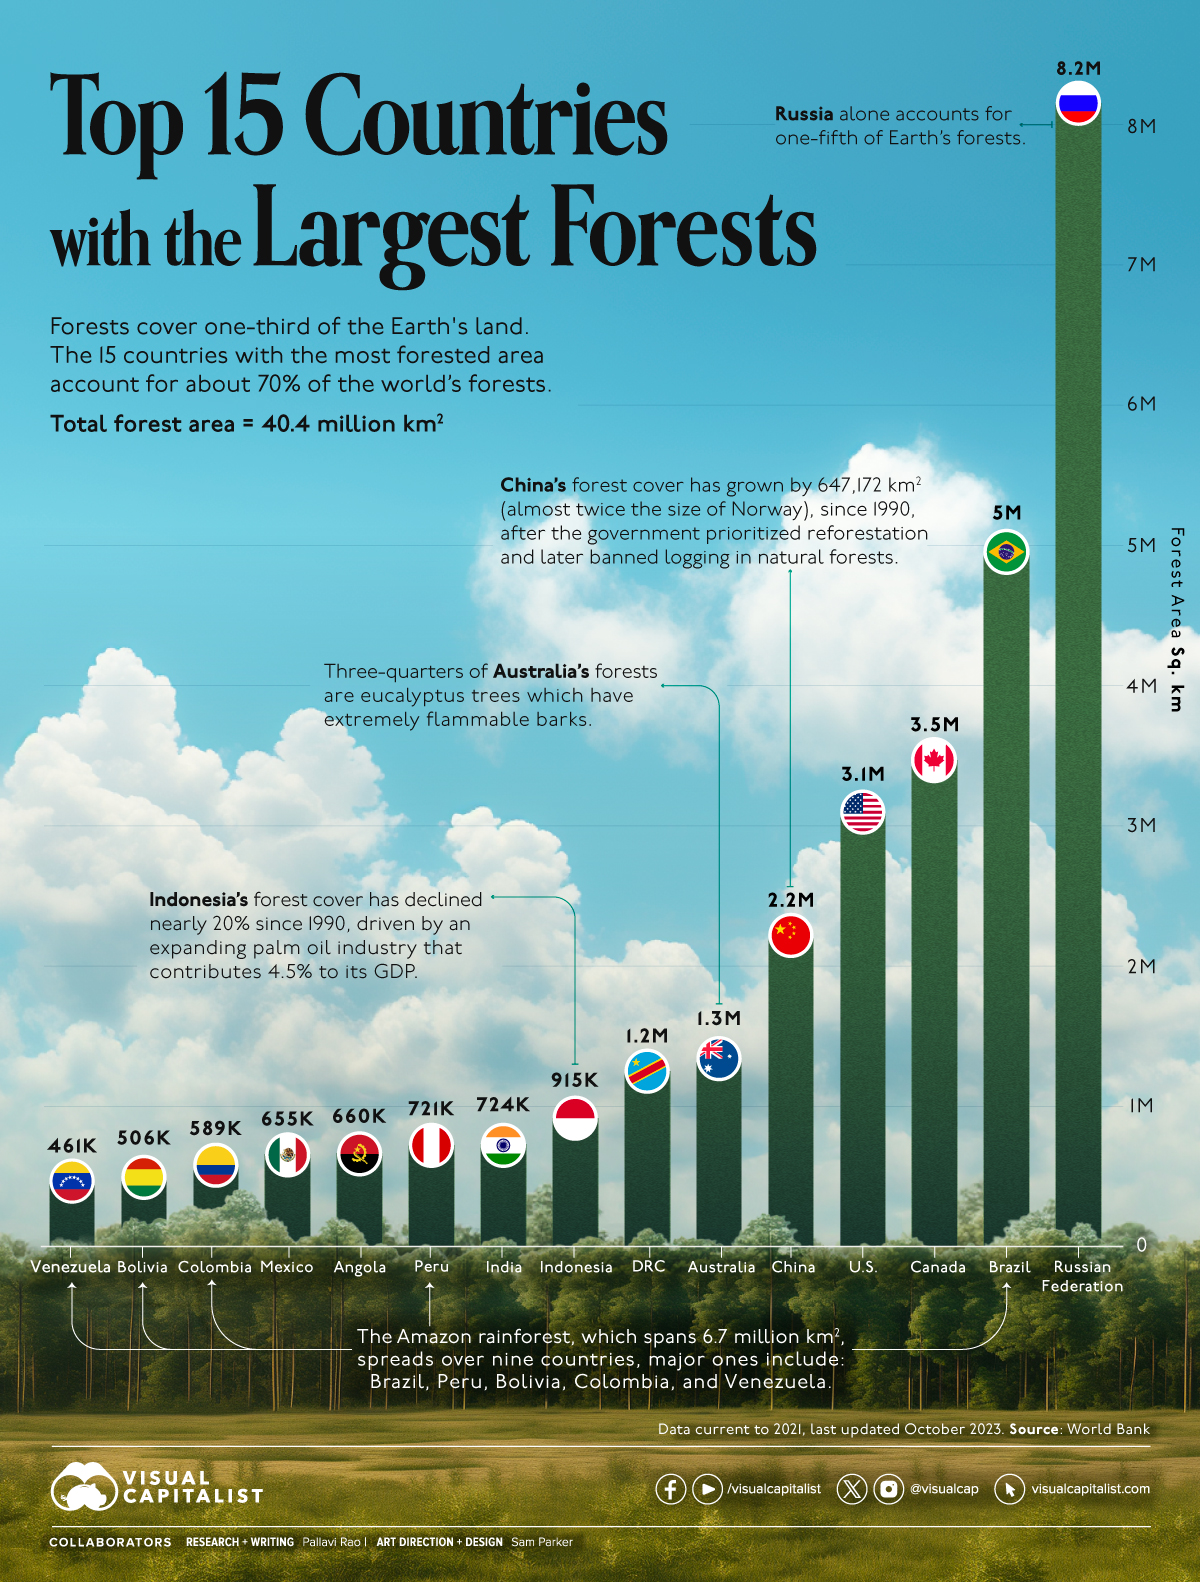 A bar chart with the top 10 countries with the largest forests as measured in square kilometers.